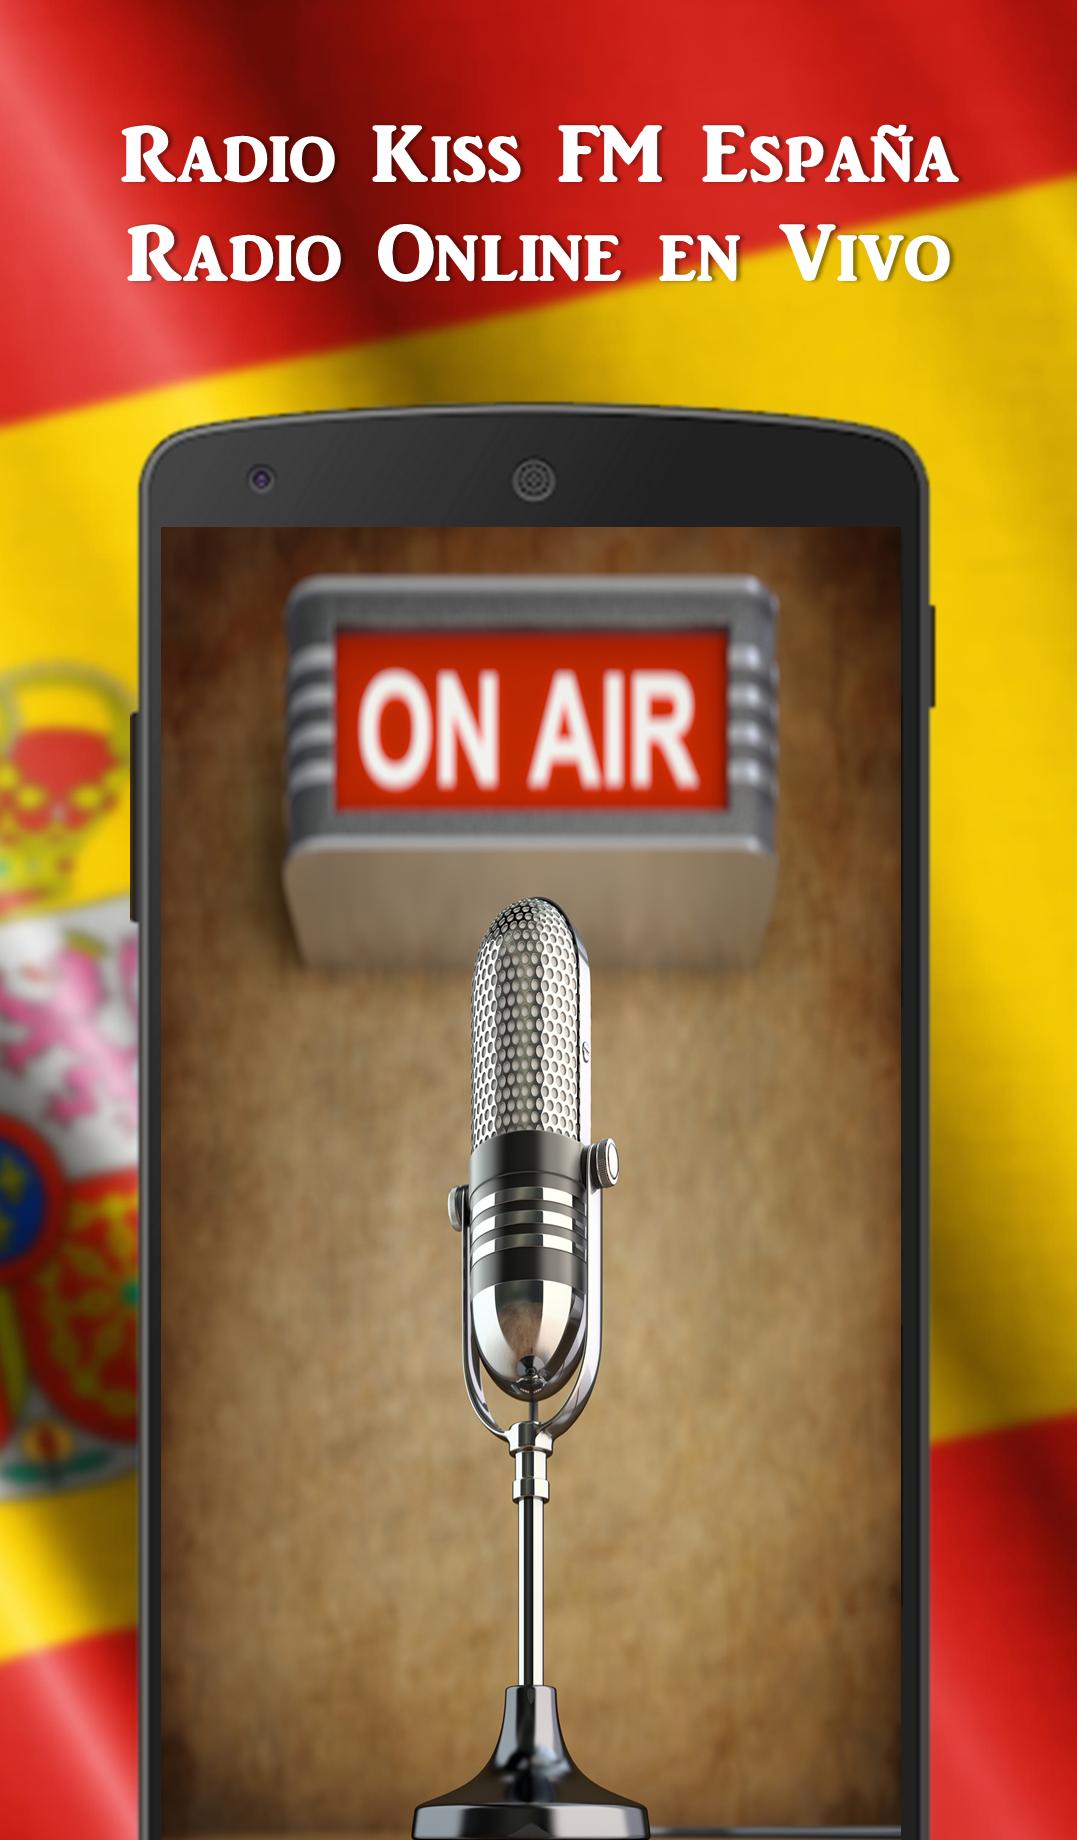 Radio Kiss FM Spain - Live Online Radio for Android - APK Download